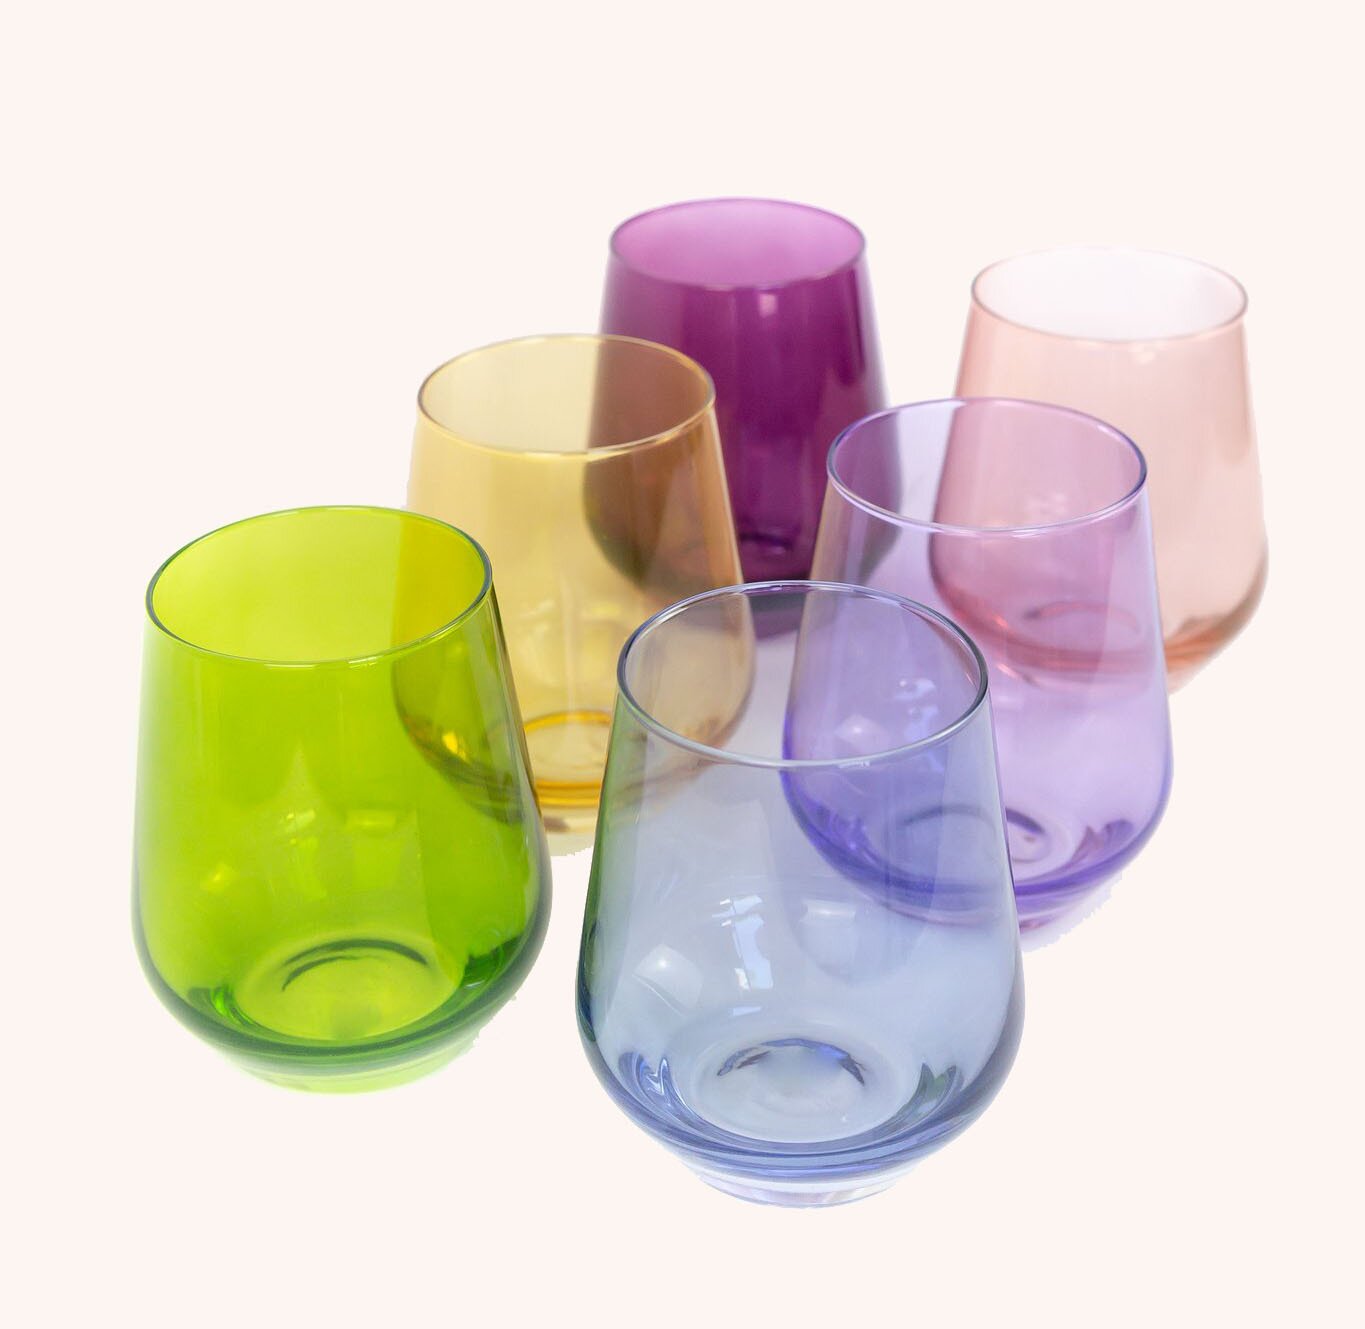 Dwell Magazine: Colored Wine Stemless Glassware by Estelle